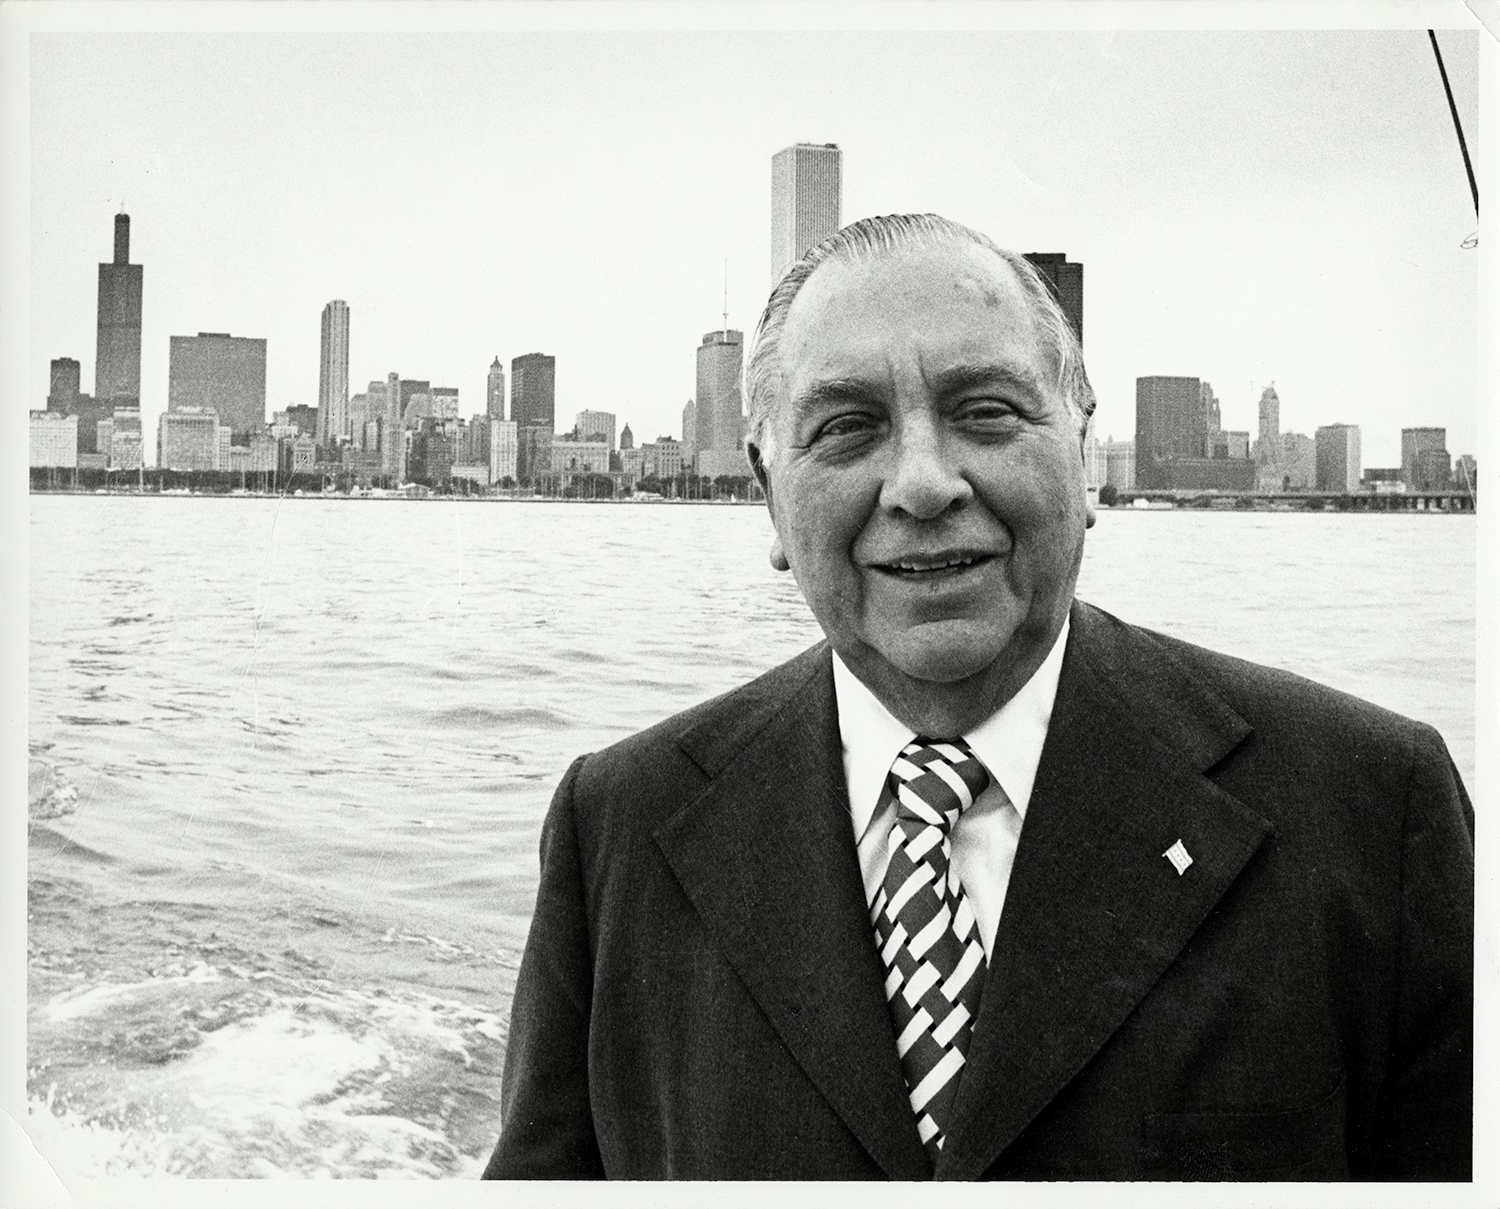 Chicago Mayor Richard J. Daley in front of the Chicago skyline. After Daley died on Dec. 20, 1976 his family donated his papers to the University of Illinois at Chicago.